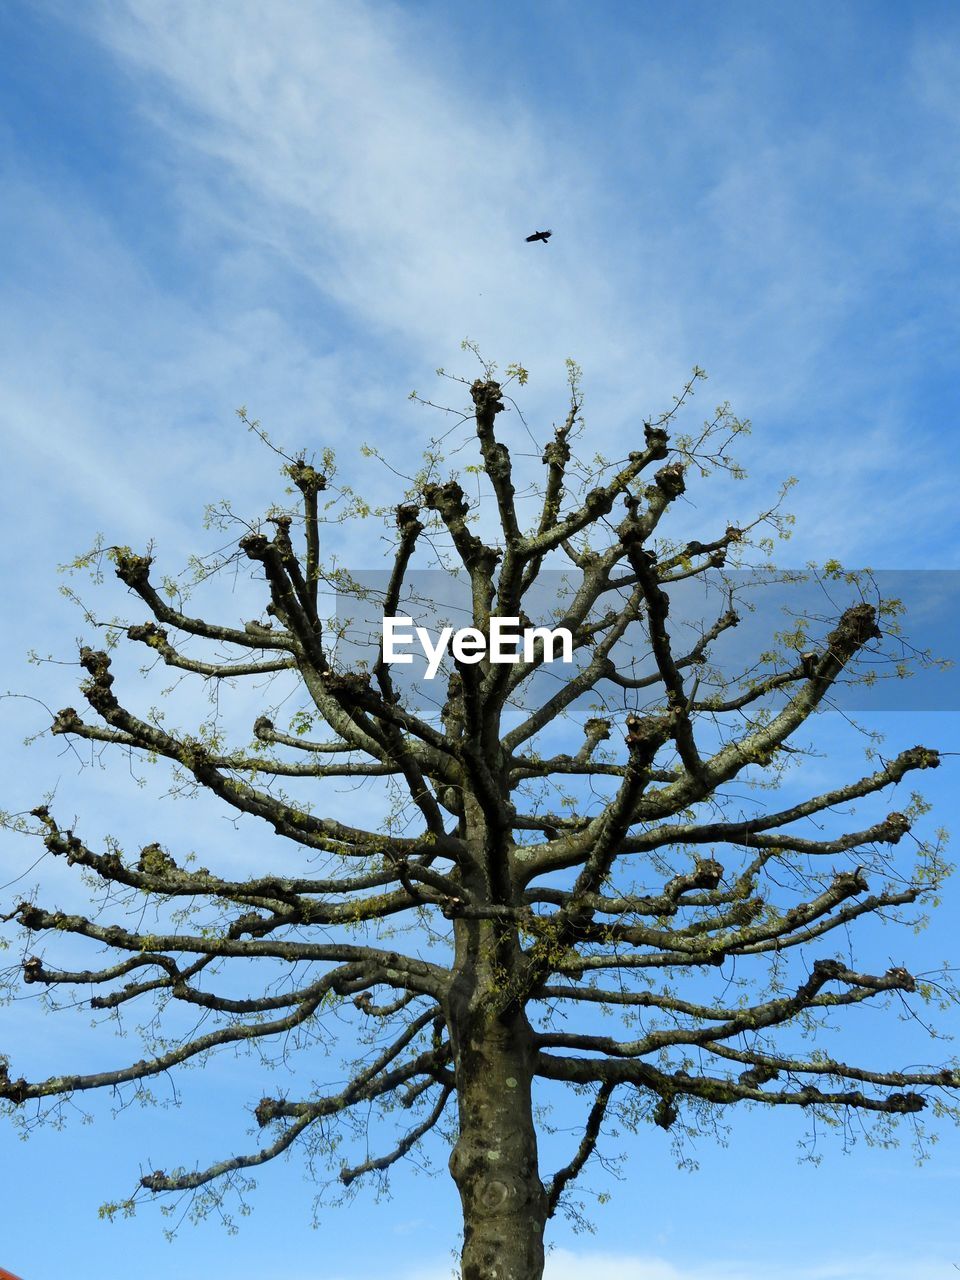 LOW ANGLE VIEW OF BIRD FLYING IN TREE